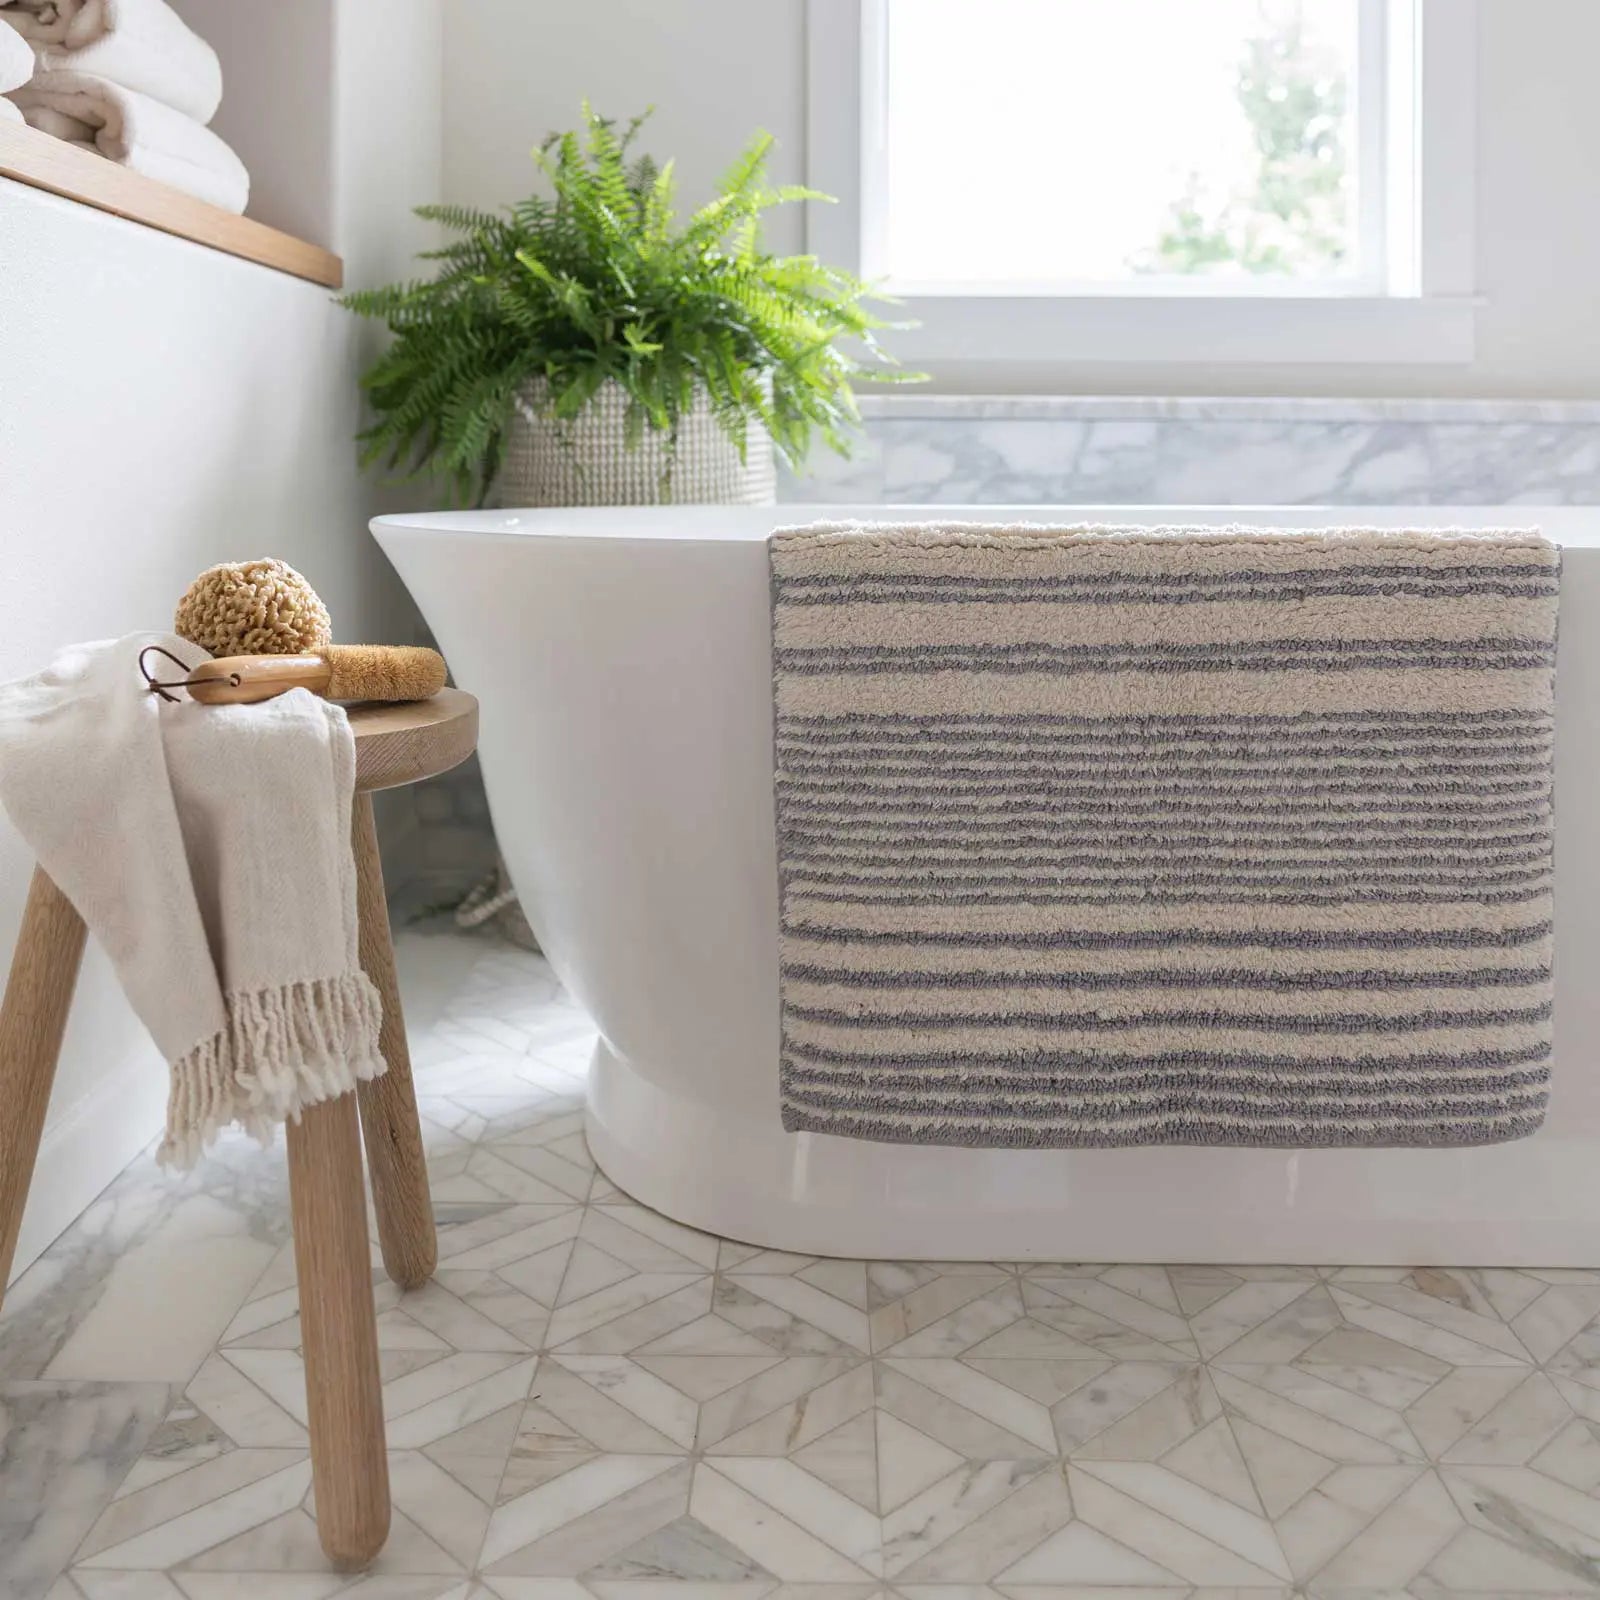 Coastal Nantucket blue and white stripe bath mat in size 21x34 hanging over the side of a bath tub with a wooden stool holding bath supplies next to the tub